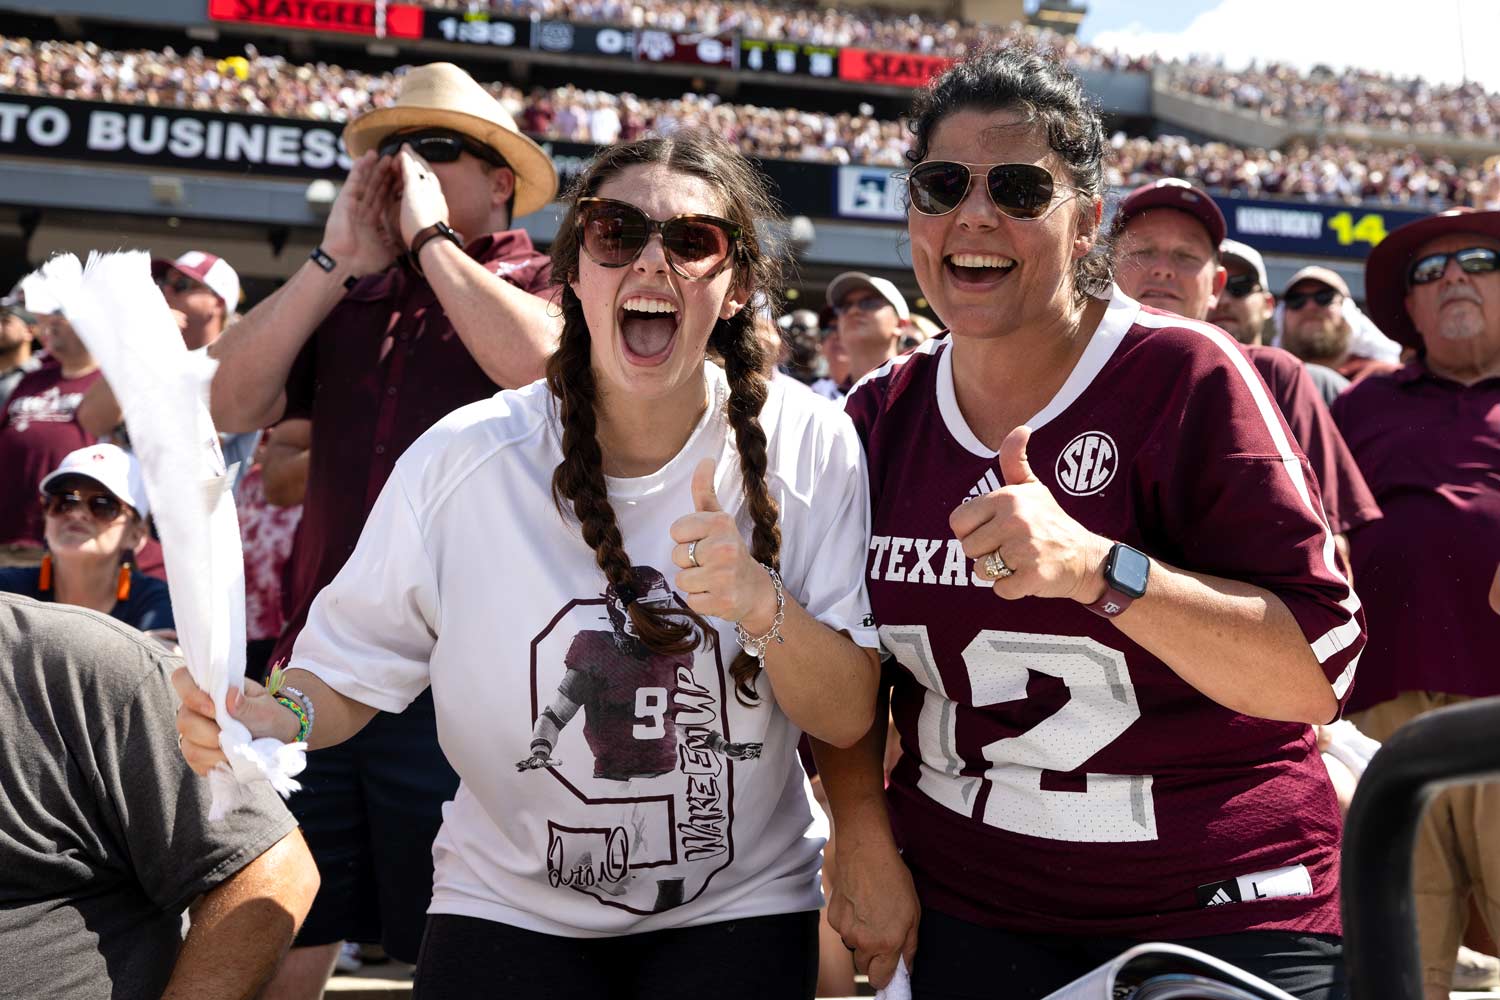 Two Texas A&M Students pose for the camera during a Fightin' Texas Aggie football game